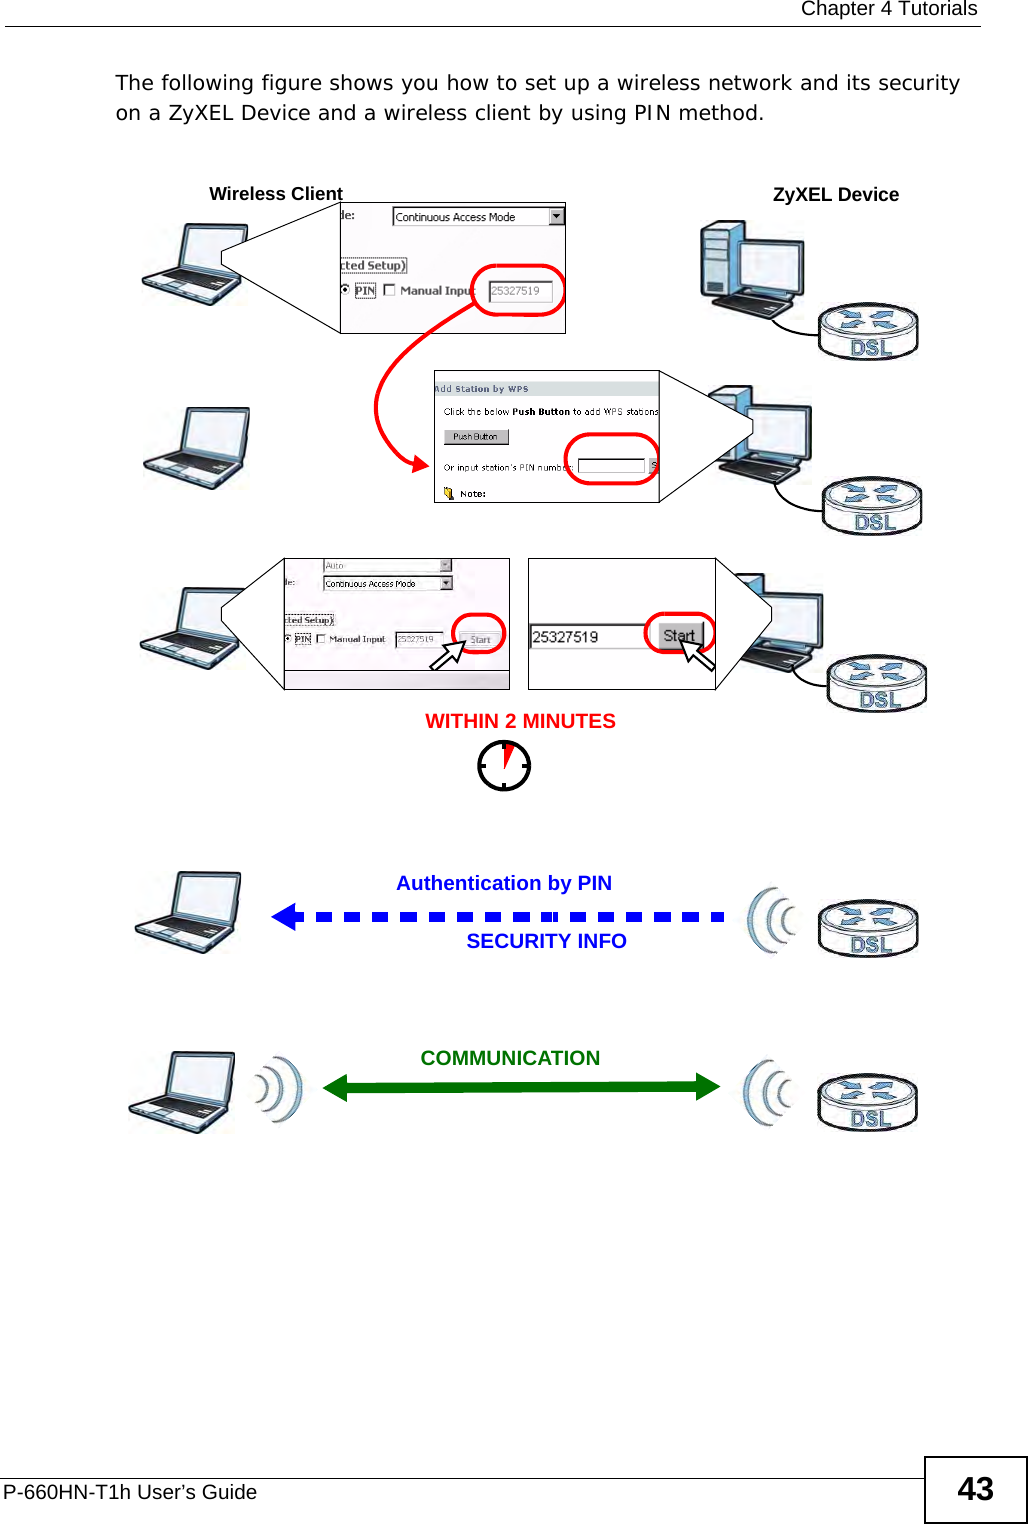  Chapter 4 TutorialsP-660HN-T1h User’s Guide 43The following figure shows you how to set up a wireless network and its security on a ZyXEL Device and a wireless client by using PIN method. Example WPS Process: PIN MethodAuthentication by PINSECURITY INFOWITHIN 2 MINUTESWireless ClientZyXEL DeviceCOMMUNICATION